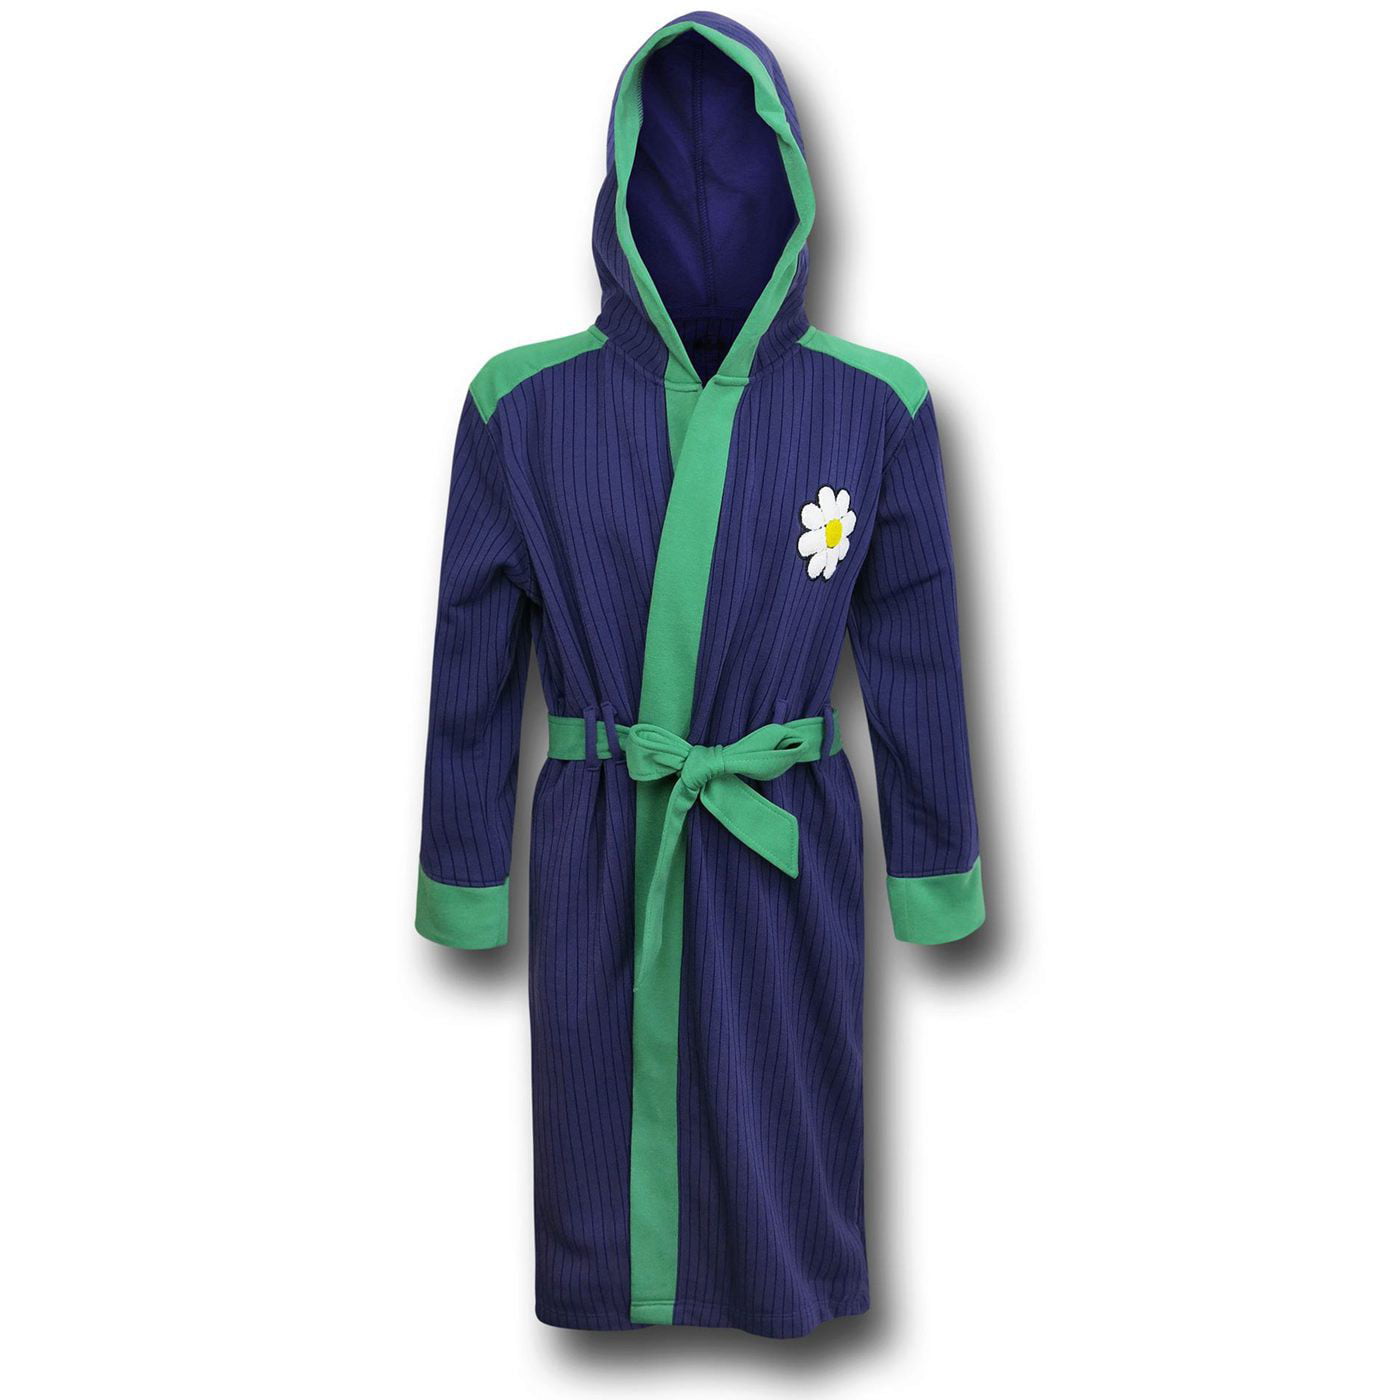 Sherlock Dressing Gown by Magnoli Clothiers